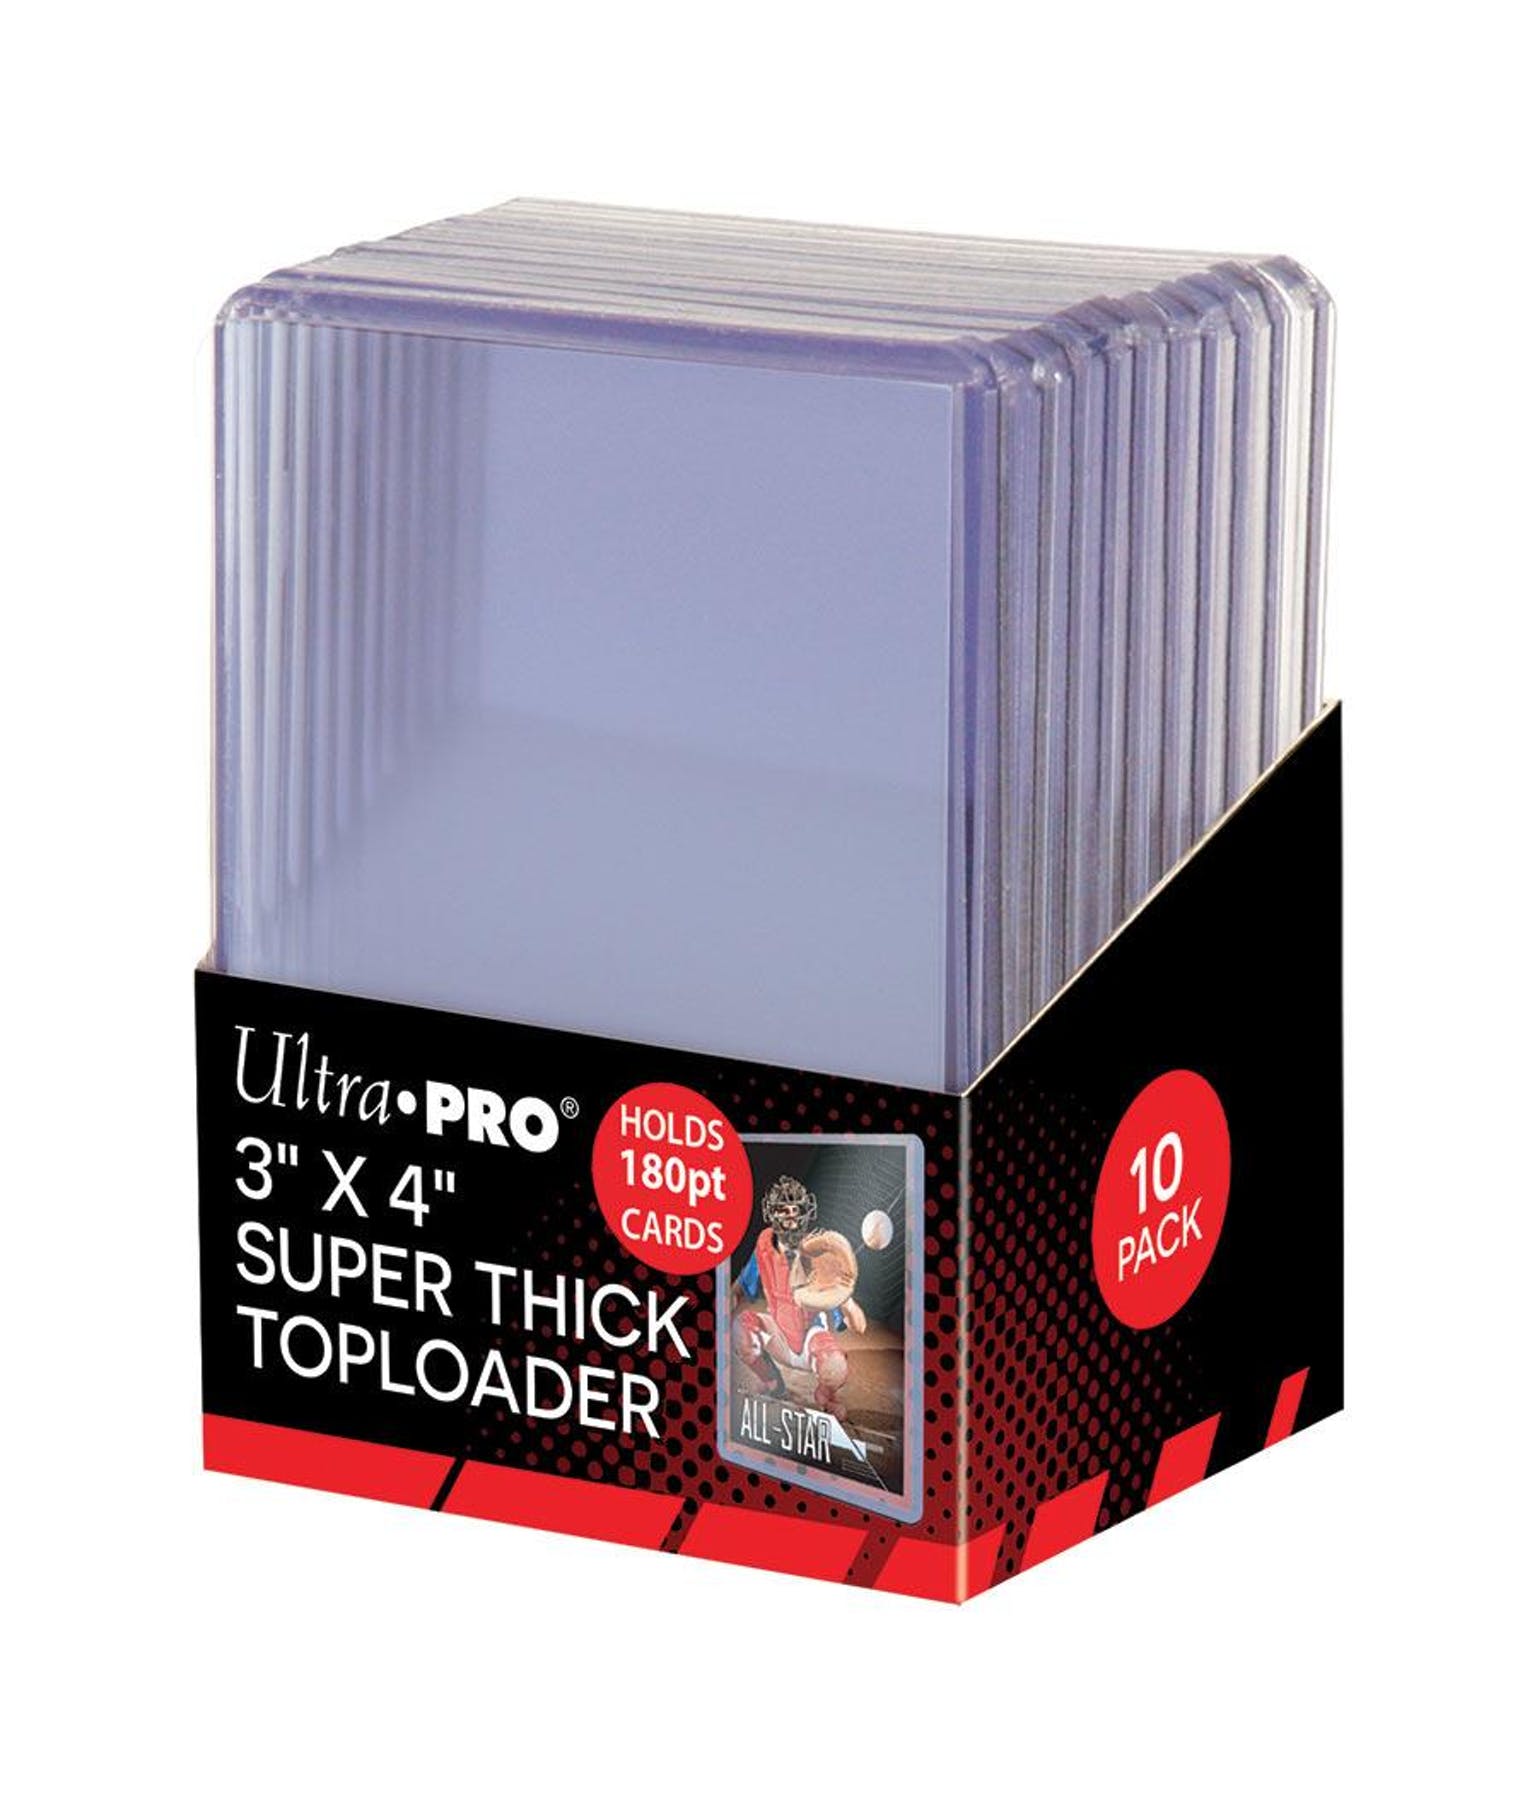 Ultra Pro Super Thick Toploaders 180pt. 3"x 4" (Lot of 5) - BigBoi Cards